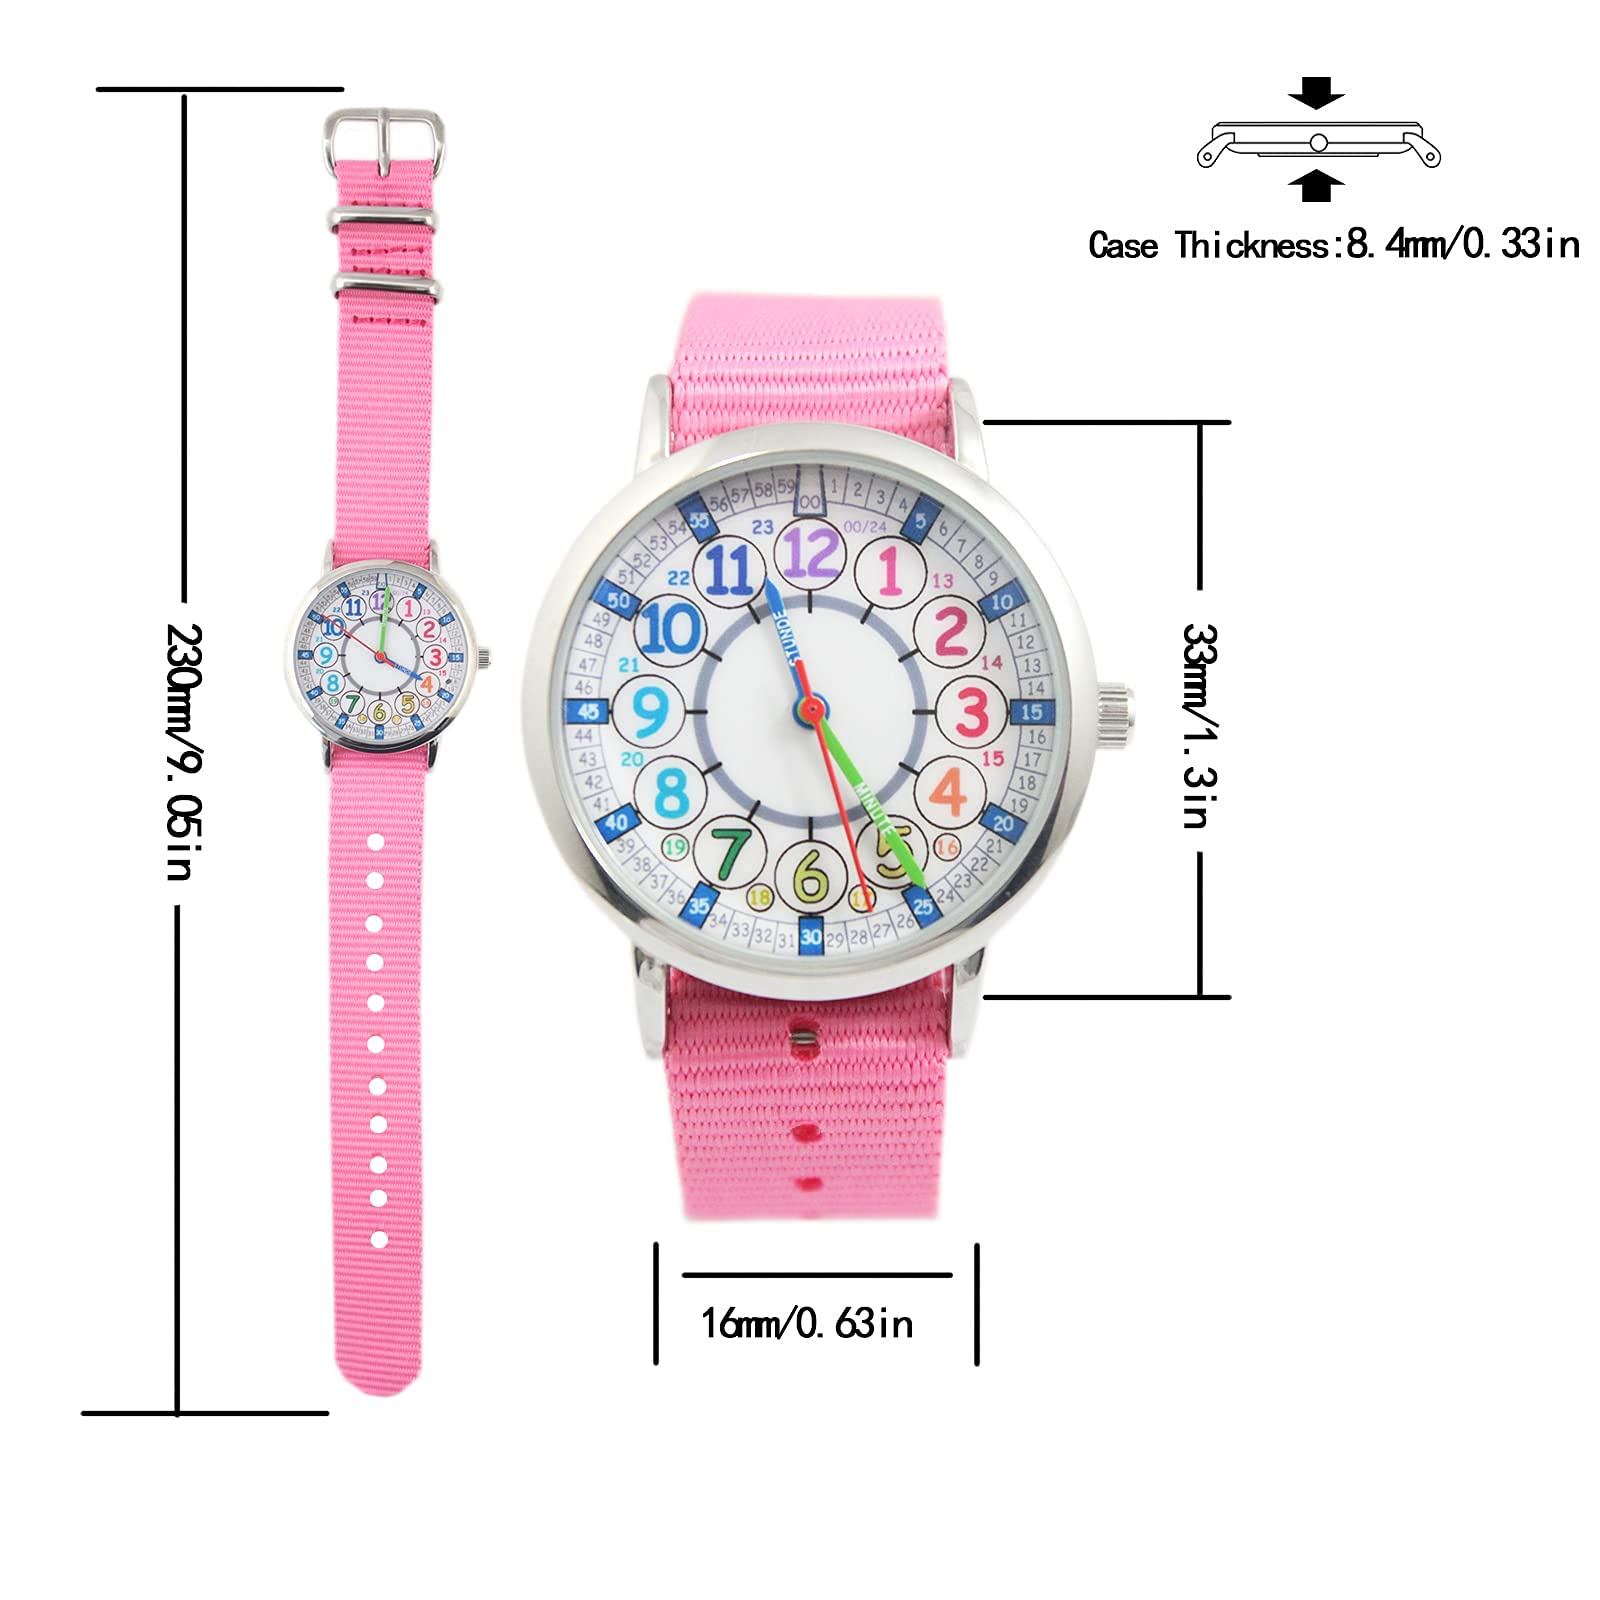 Bigbangbang Kids Analog Watch， Learning Time Watch, First Watch Soft Cloth Strap,Read time Study Time Todder Watch,Kindergarten Learn Time Watches,Pink Girl Watch， Girls Ages 7-10…